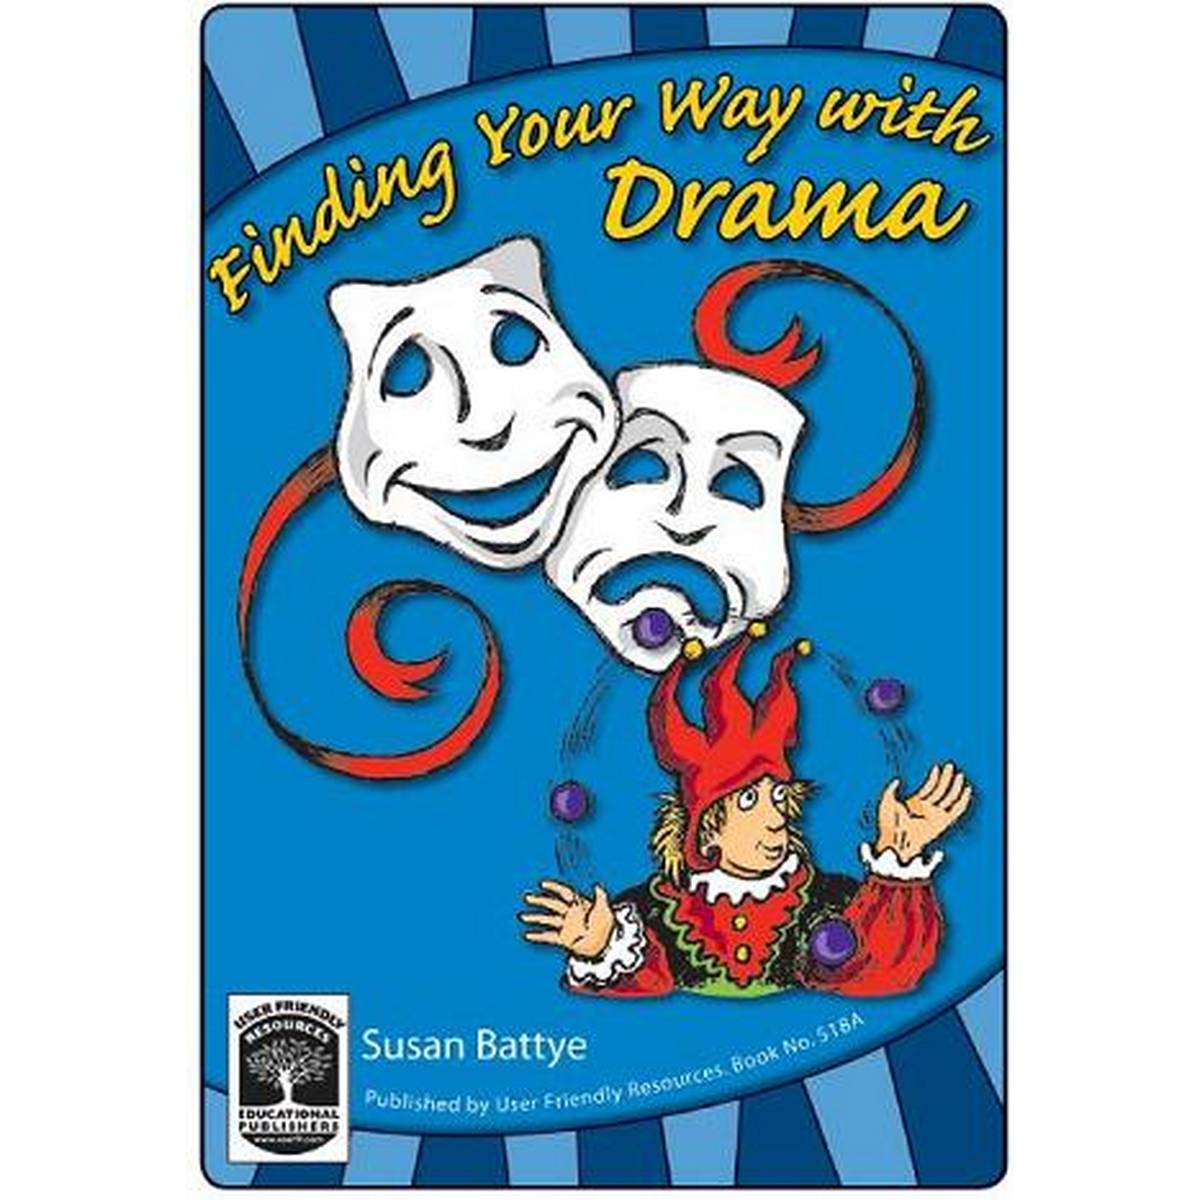 Finding Your Way with Drama